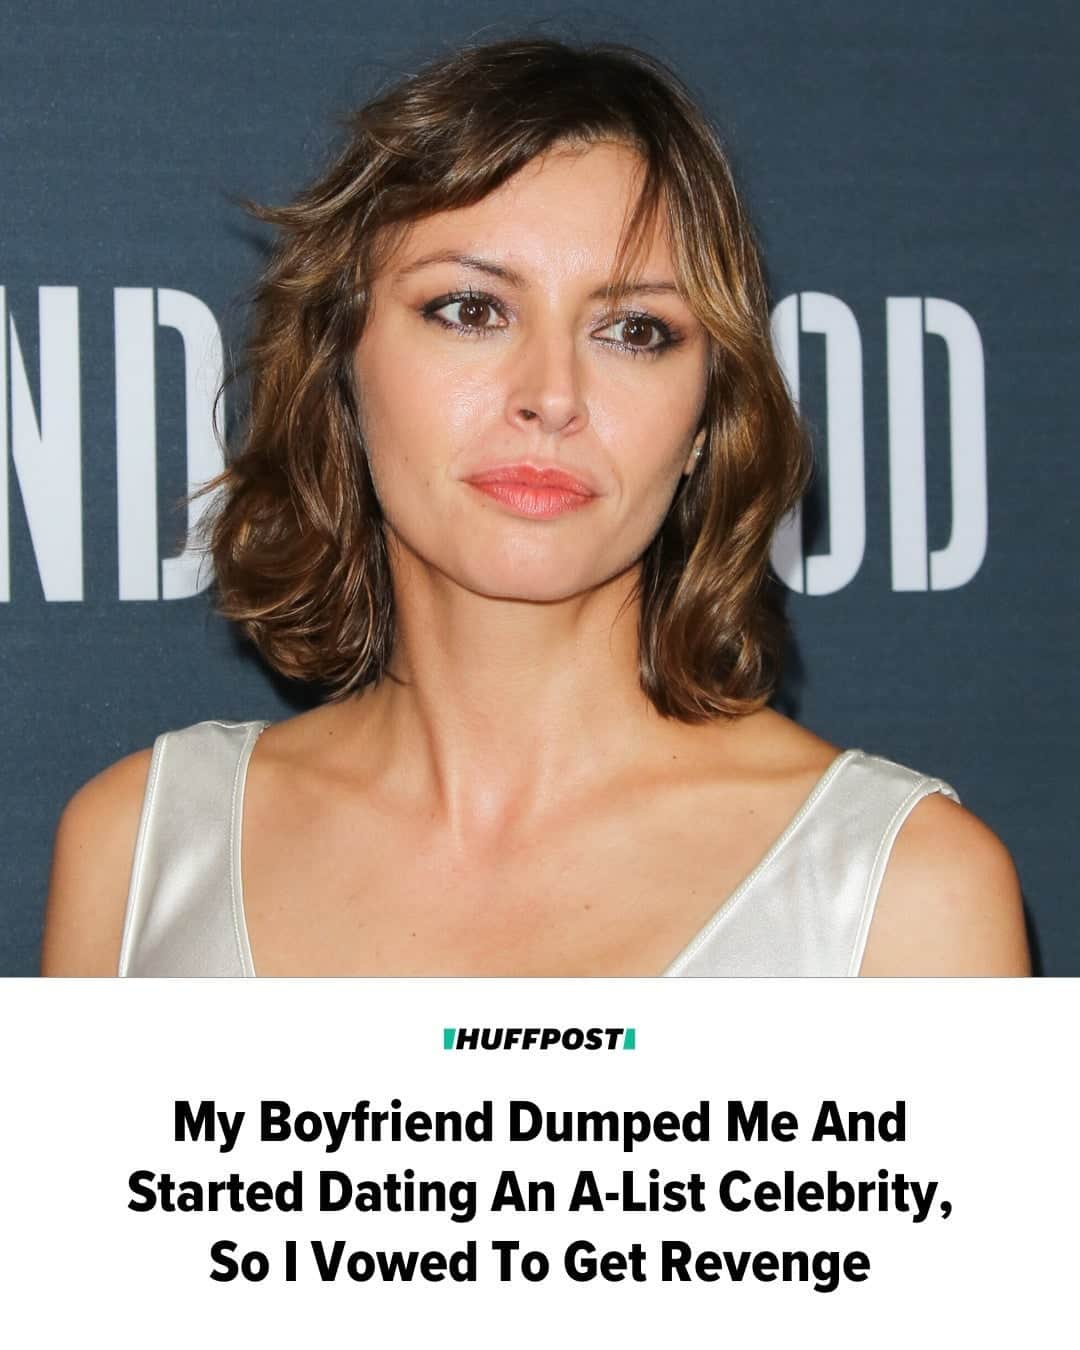 Huffington Postのインスタグラム：「"I was gently informed by a friend that The Man had already moved on. To someone famous. A-list famous. Before I could catch my breath, it was headline news. On TV, on my phone, even in a magazine in the grocery store checkout line — there they were, 'canoodling,'" writes HuffPost guest writer Holly Solem.  "Unable to eat. Heart crushed. Ego obliterated. Shame spiraling after seeing myself through the harsh light of his baby blues."  "When his mother emailed me a photo from our recent visit (apparently unaware of his upgrade), my sadness turned to rage."  Read more at our link in bio. // 📷 Getty Images」